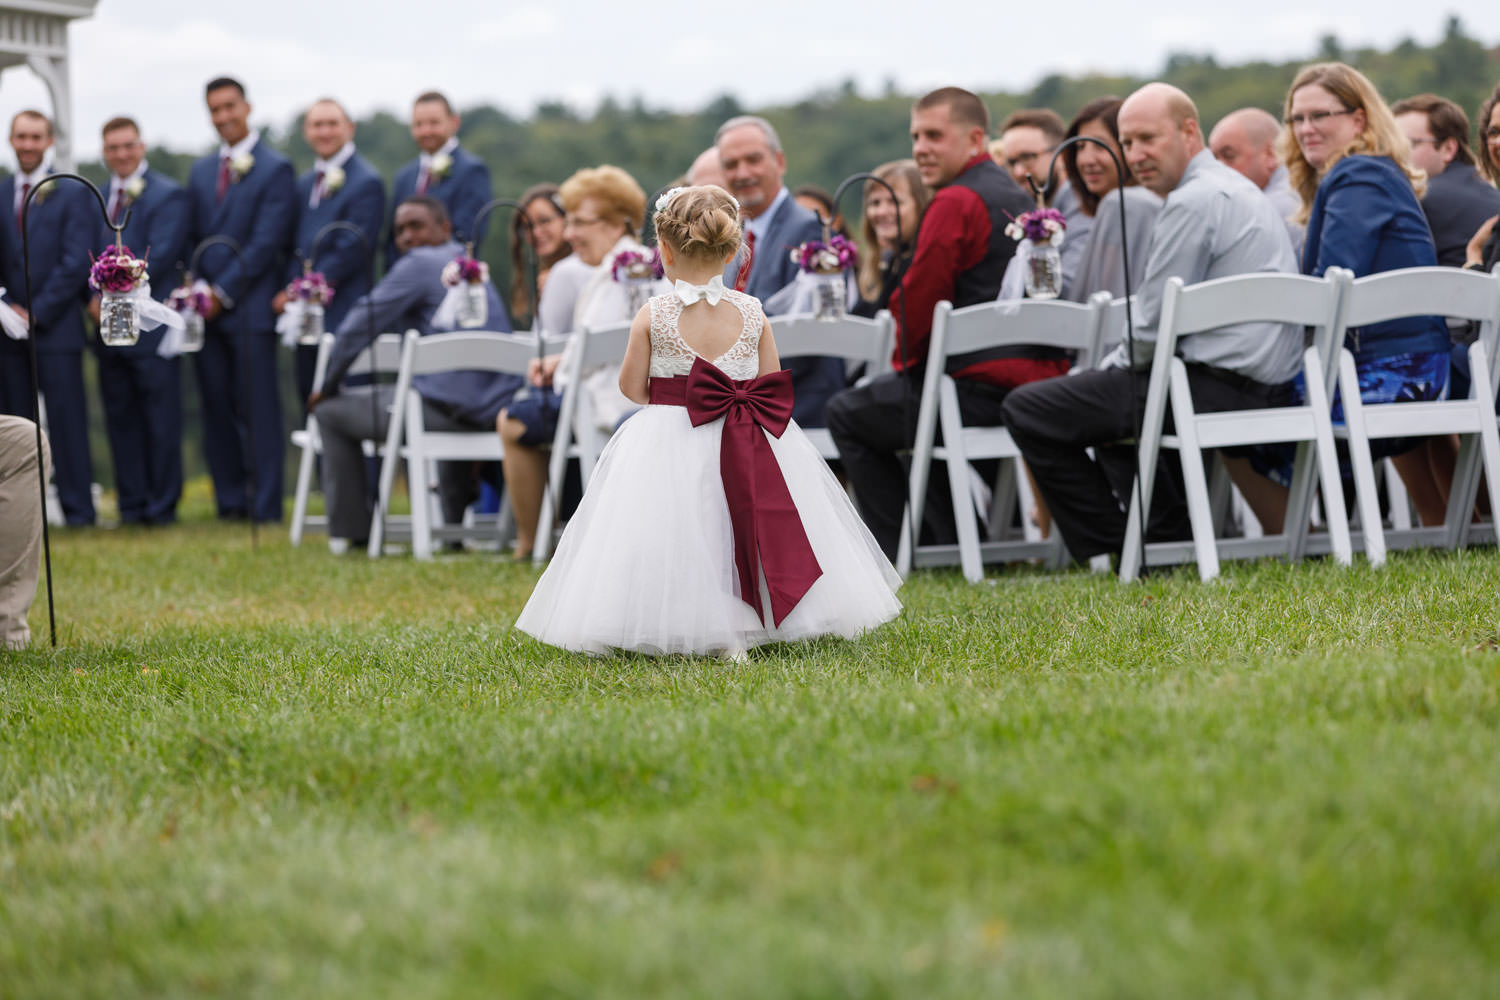 Flower girl walking down the aisle at outdoor ceremony